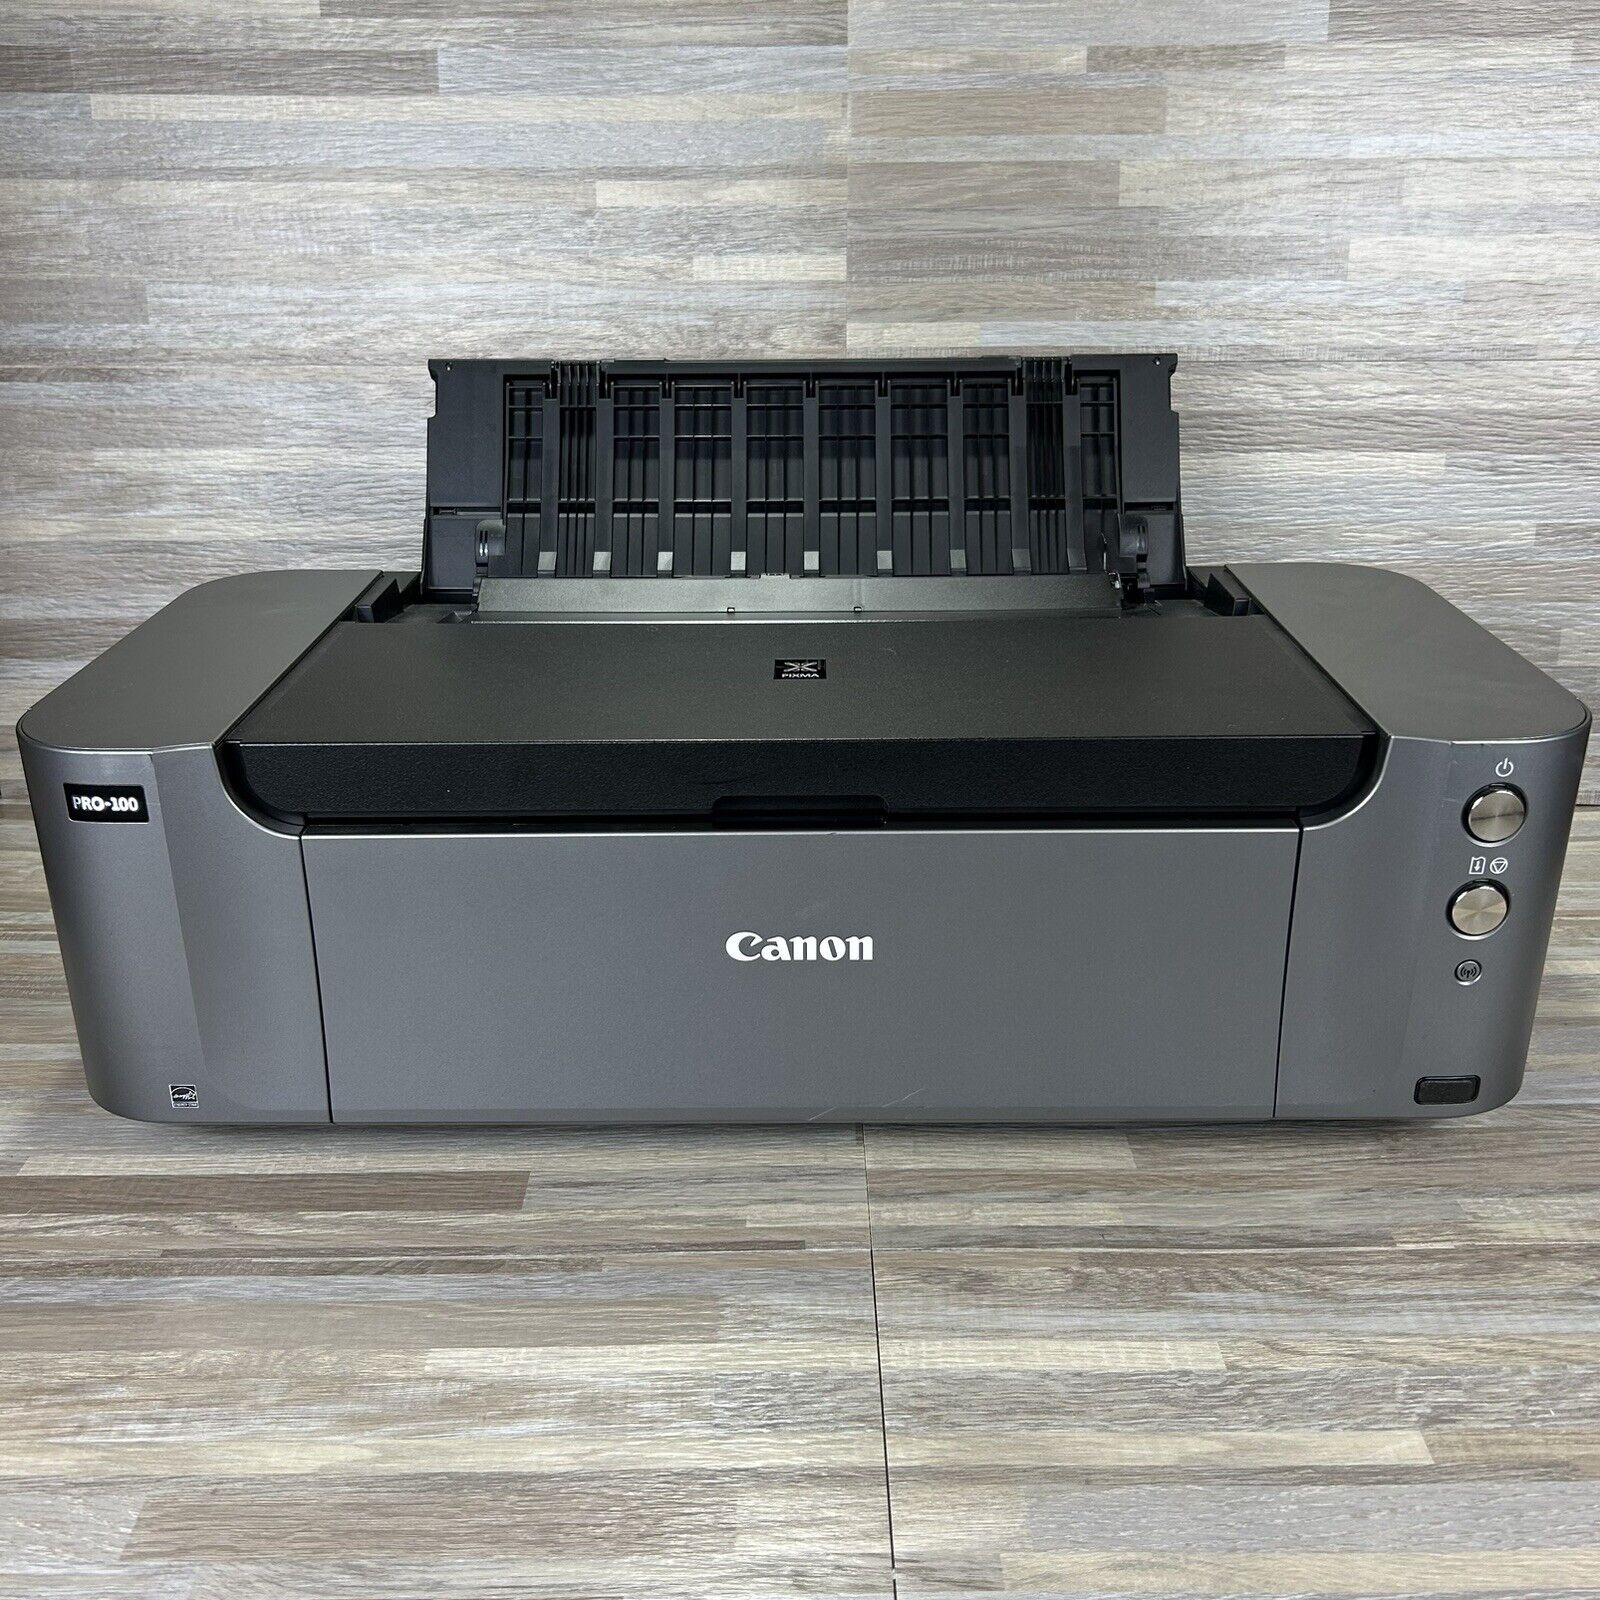 Canon Pixma Pro-100 Wireless Color Professional Inkjet Printer - Only 1-50 Pages